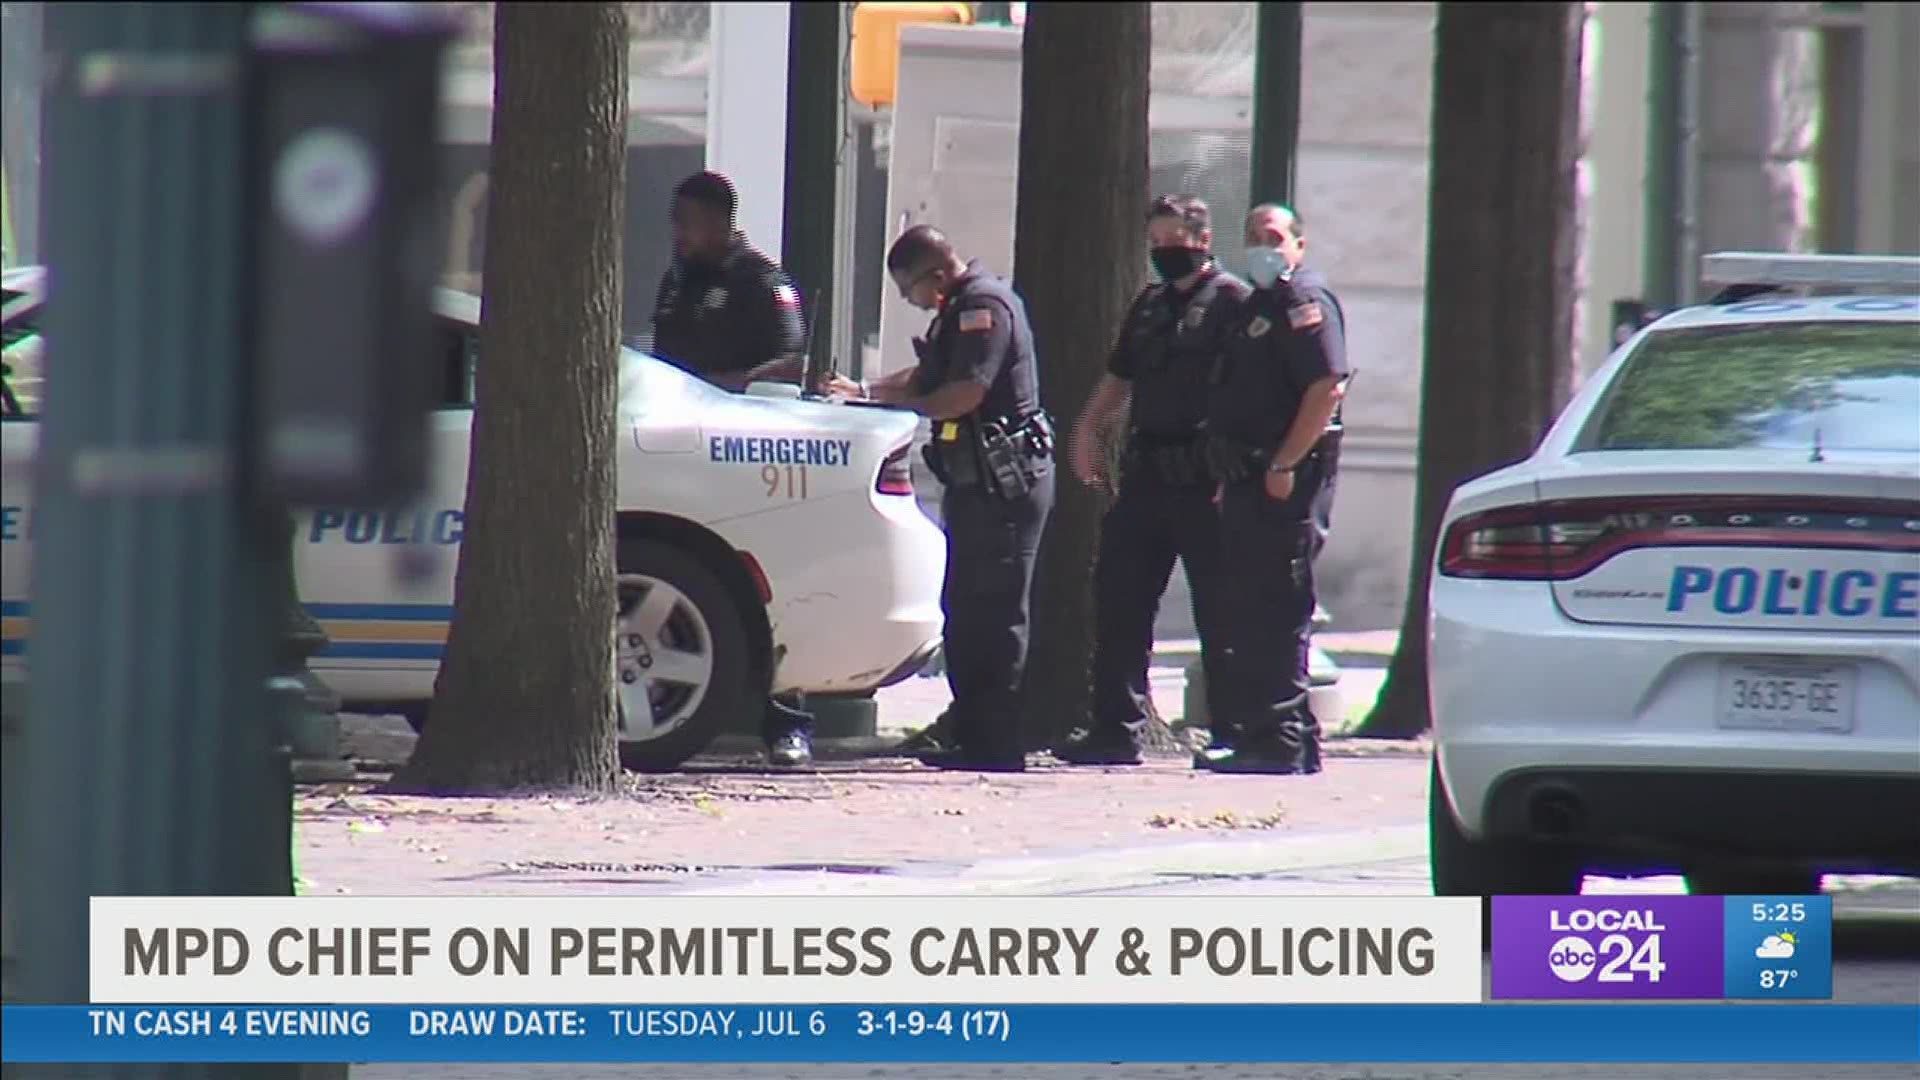 Local 24 News political analyst and commentator Otis Sanford shares his point of view on police dealing with Tennessee’s new permitless carry law.